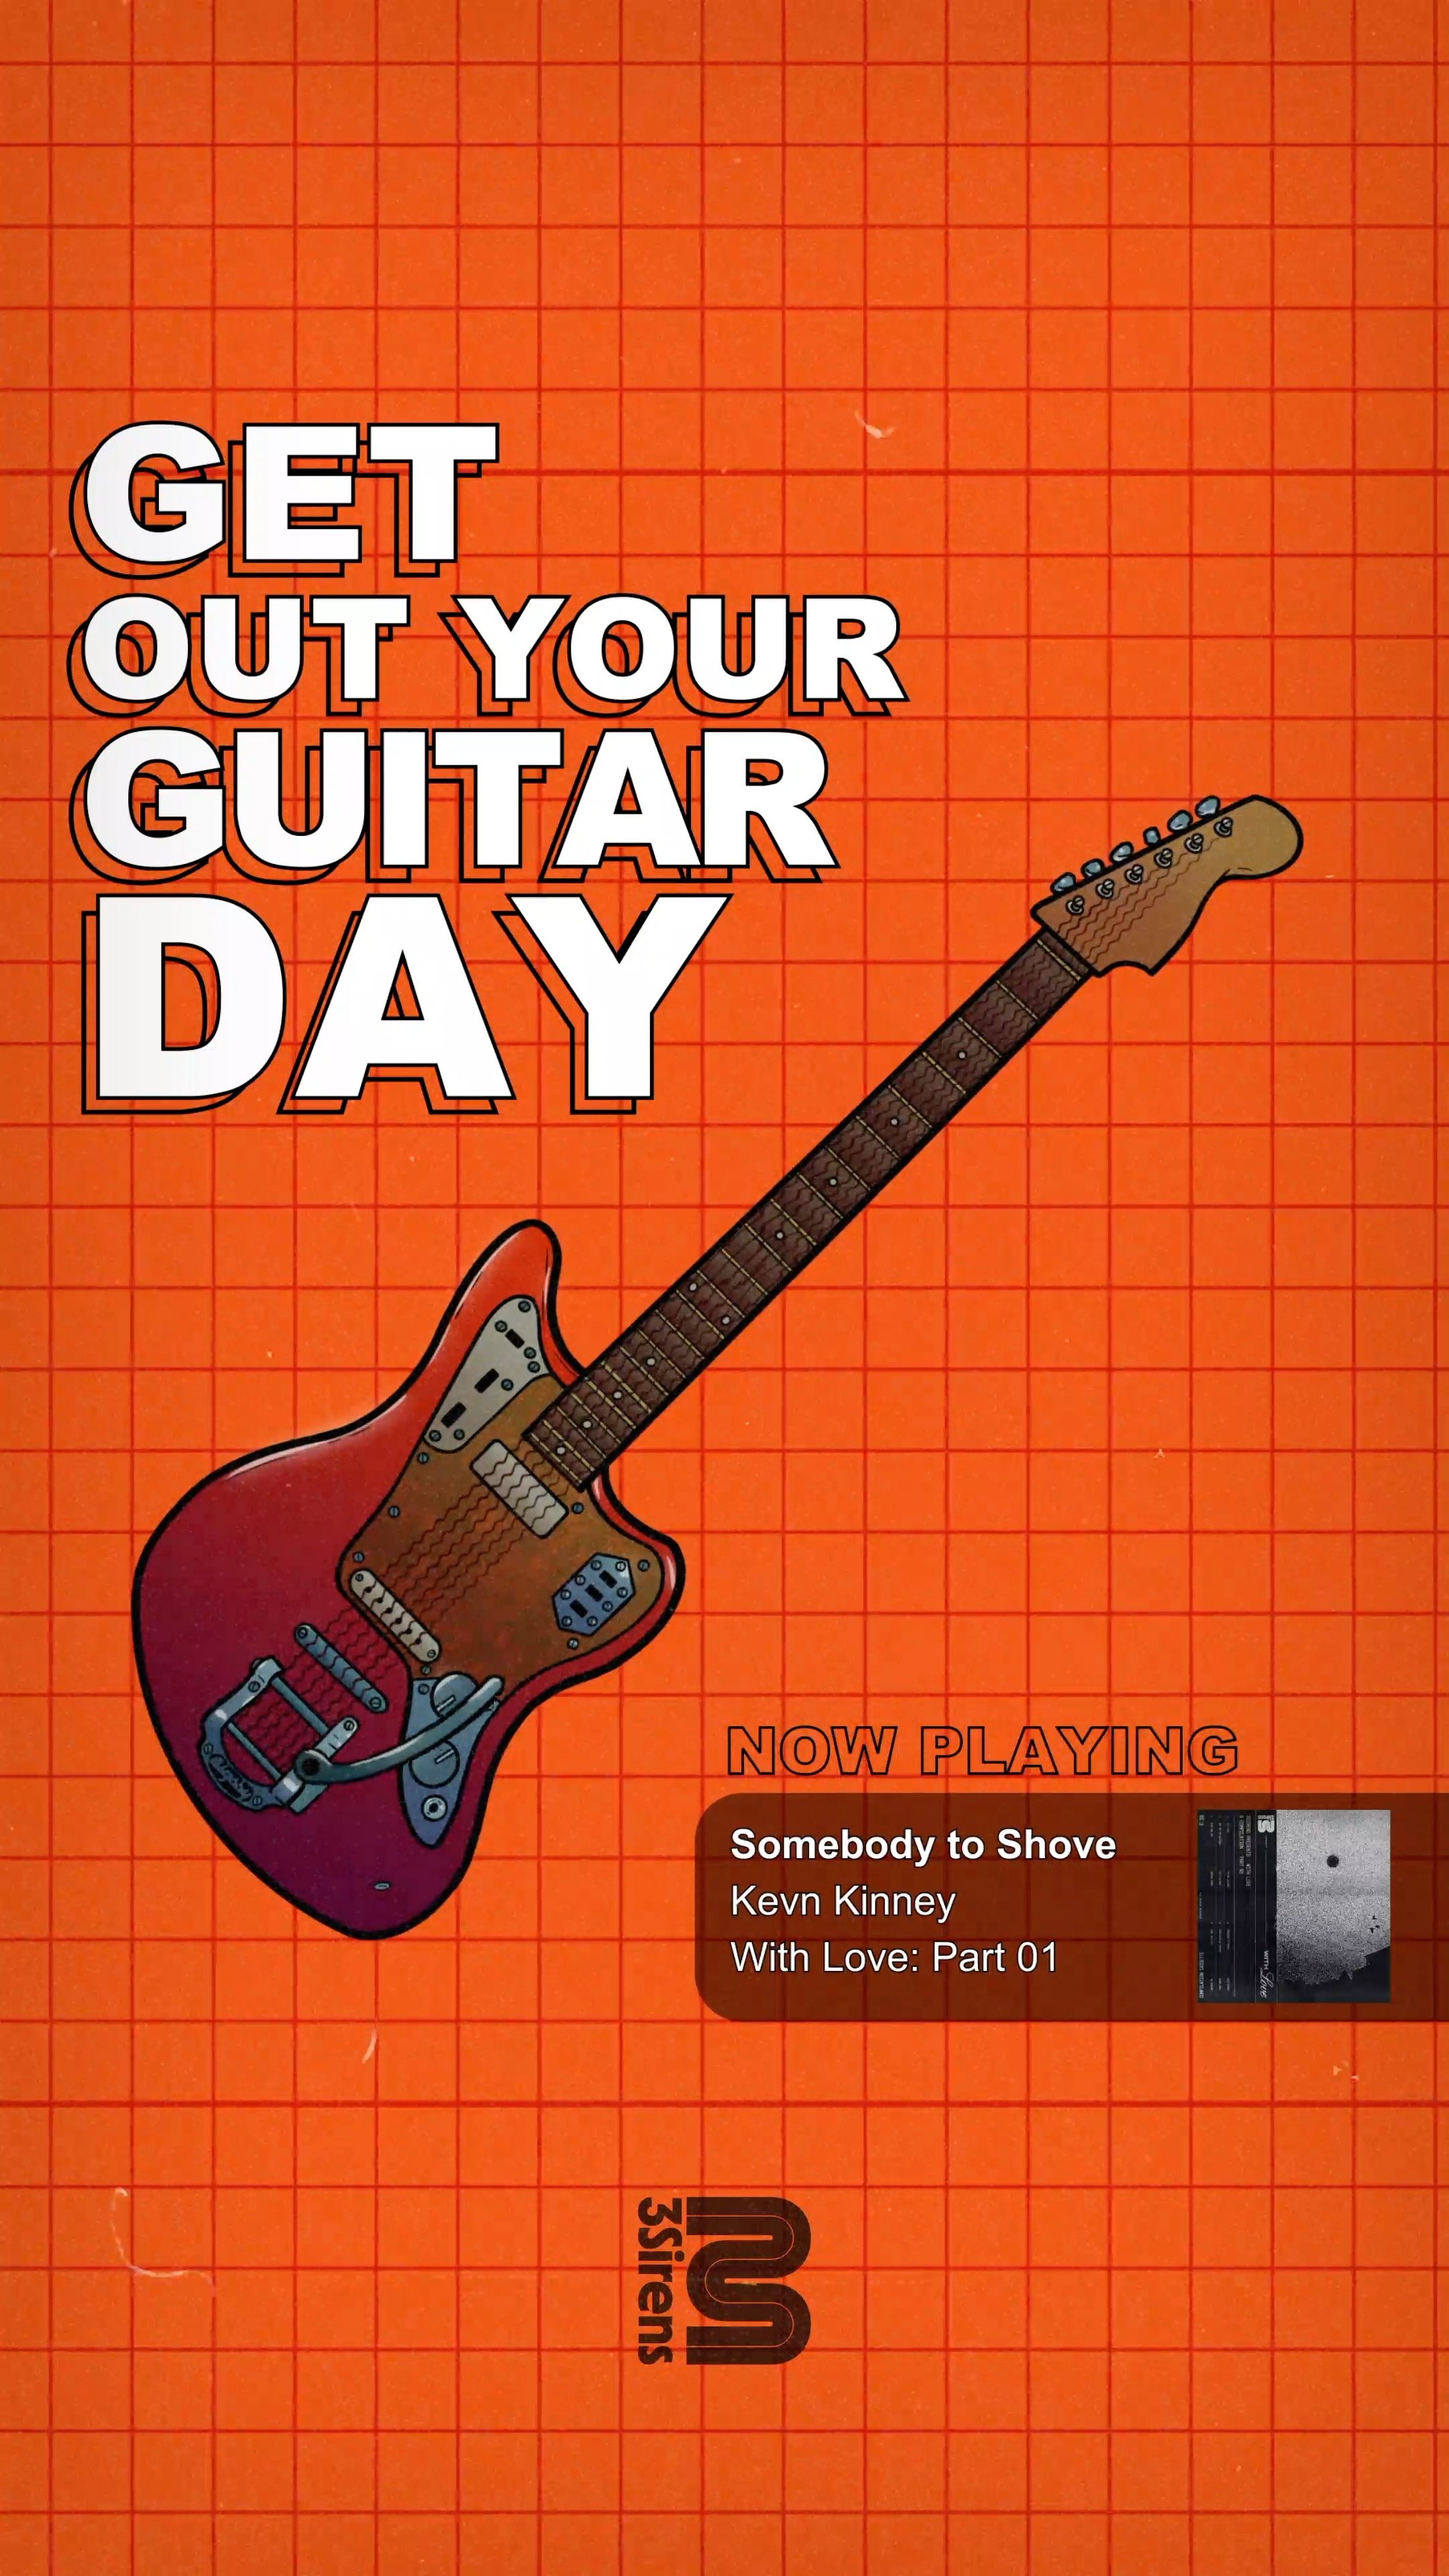 3Sirens - Get Your Guitar Out Day 